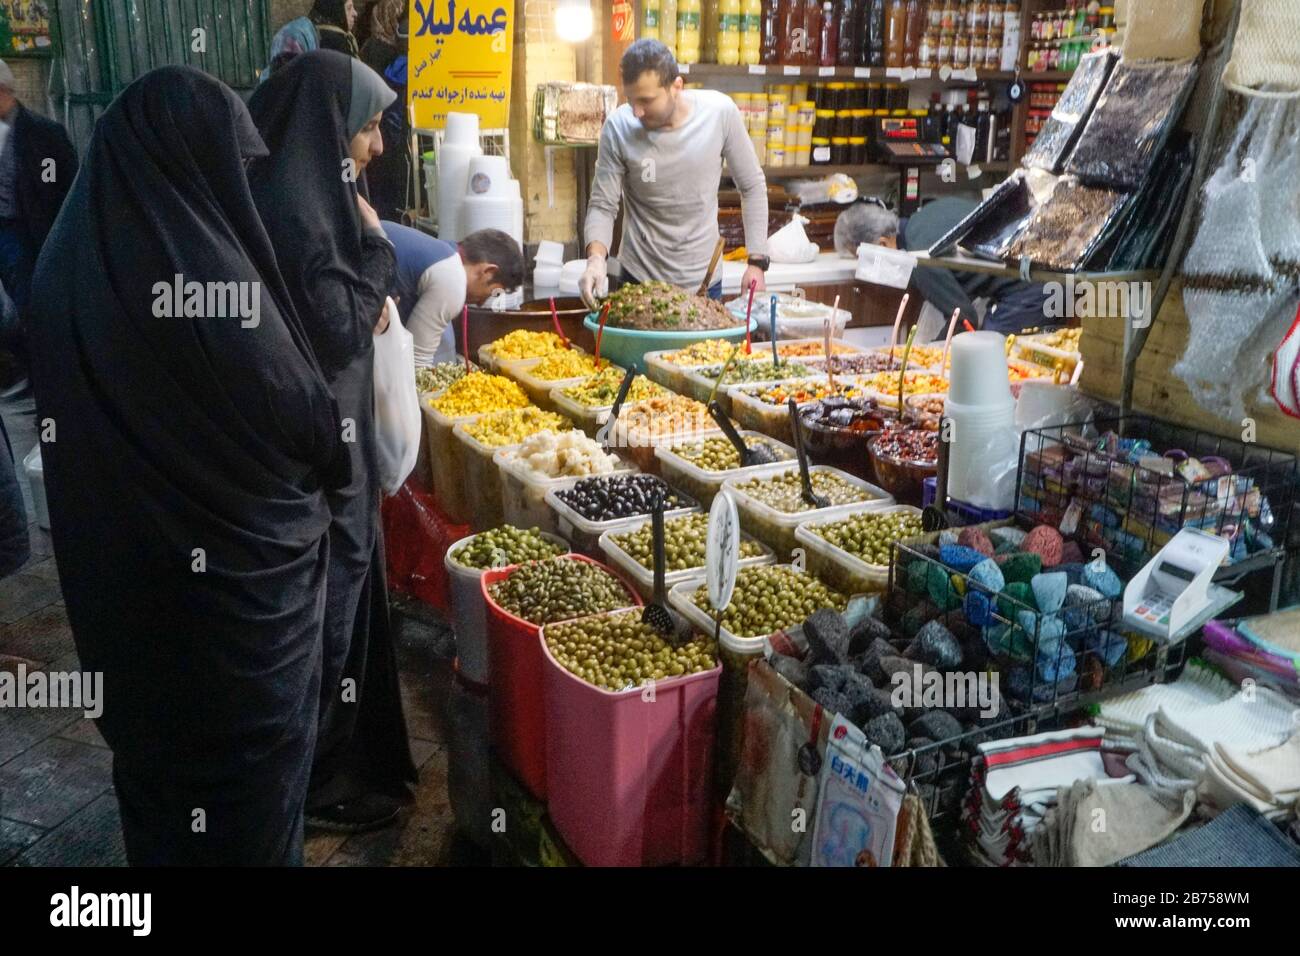 Fruit and vegetables sold in a bazaar in Tehran, Iran, on 9 March 2019. After the USA withdrew from the international nuclear agreement, the country is again imposing sanctions against Iran. [automated translation] Stock Photo